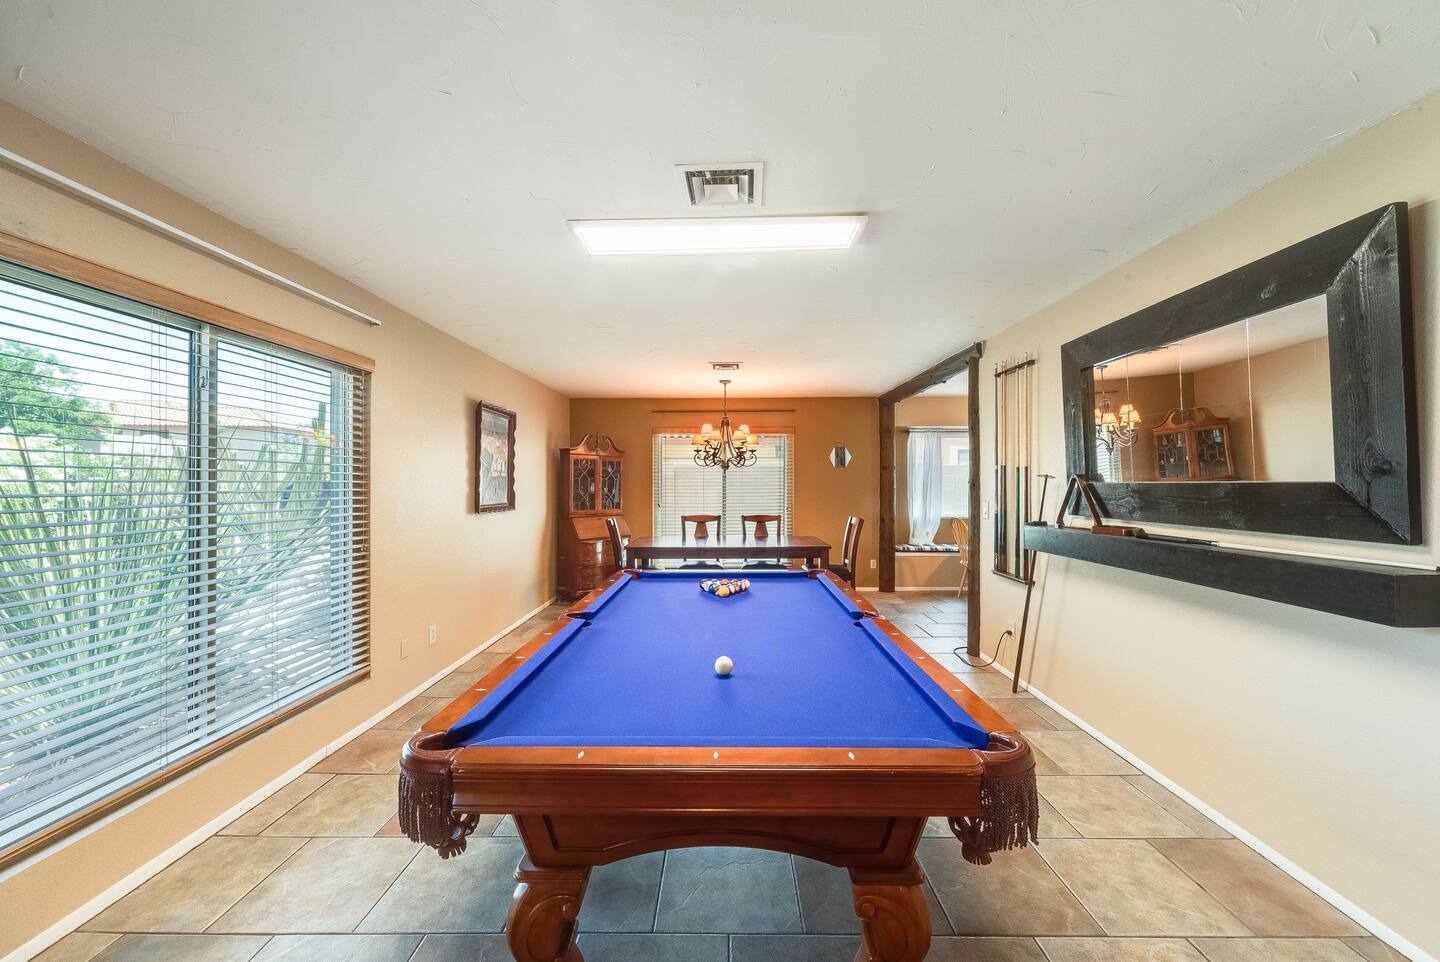 Glendale Vacation Rentals, Cahill Casa - Pool table for game nights on the first floor